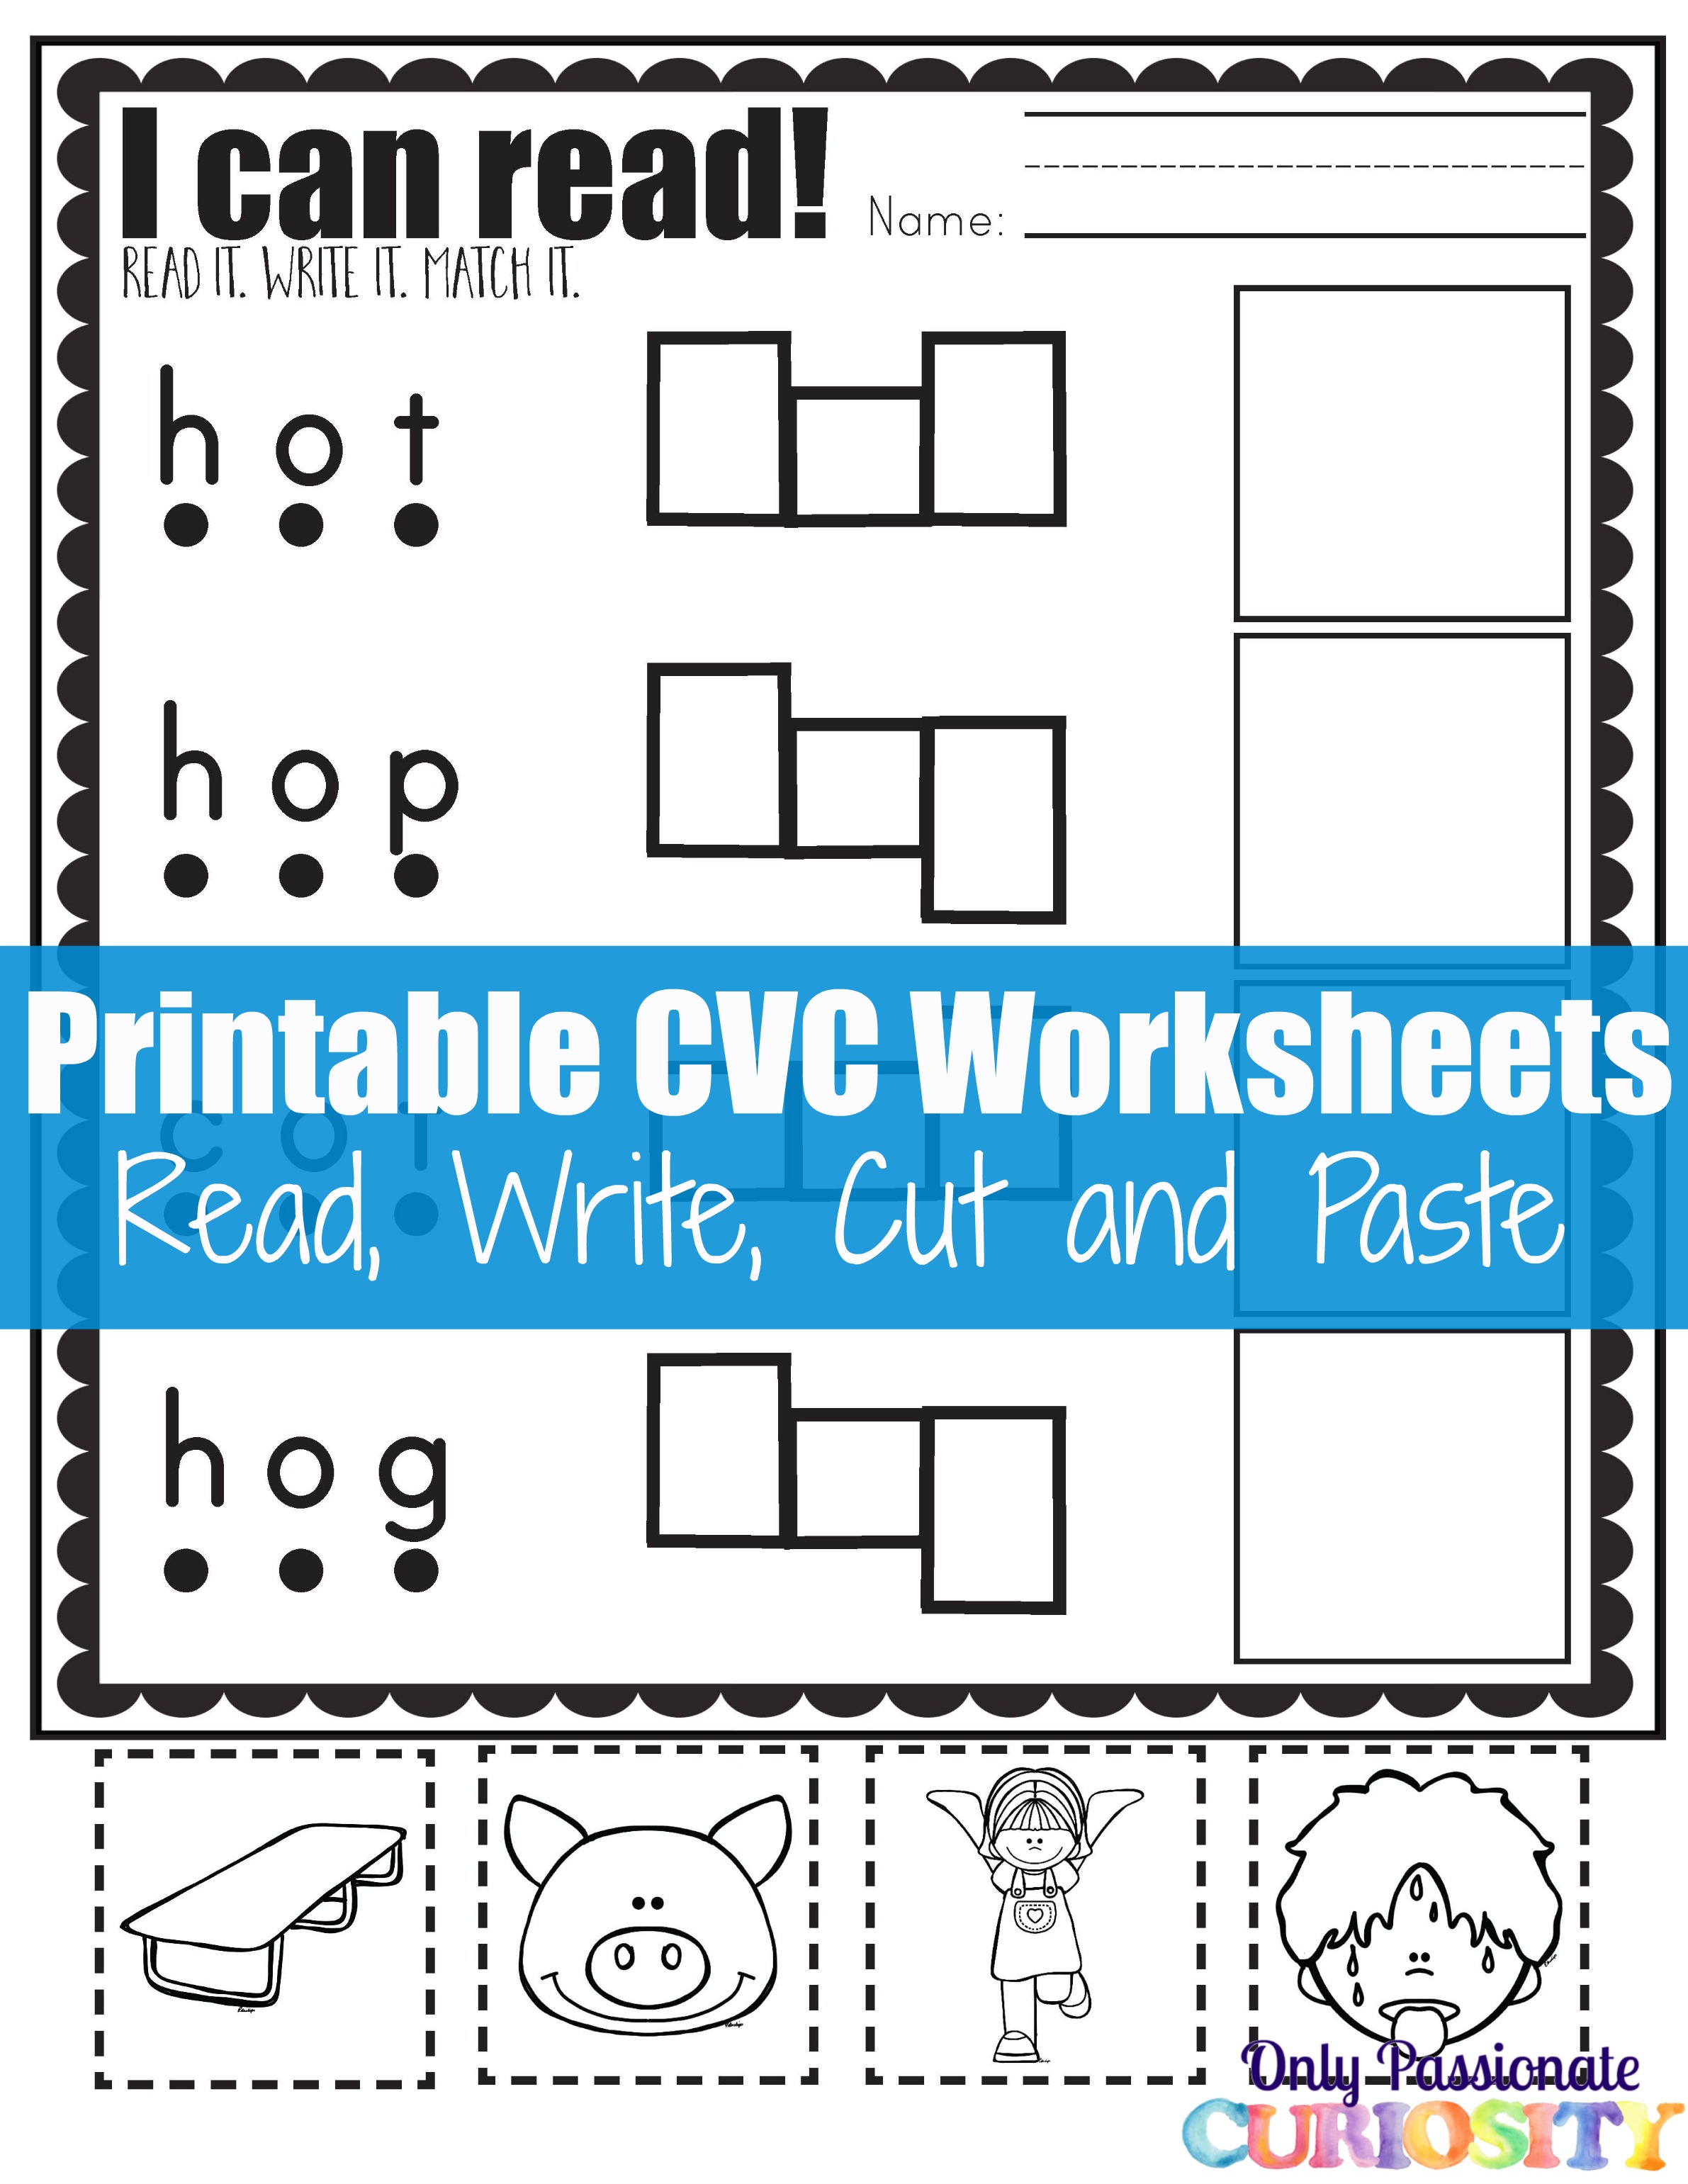 cvc-worksheets-cut-and-paste-letter-o-only-passionate-curiosity